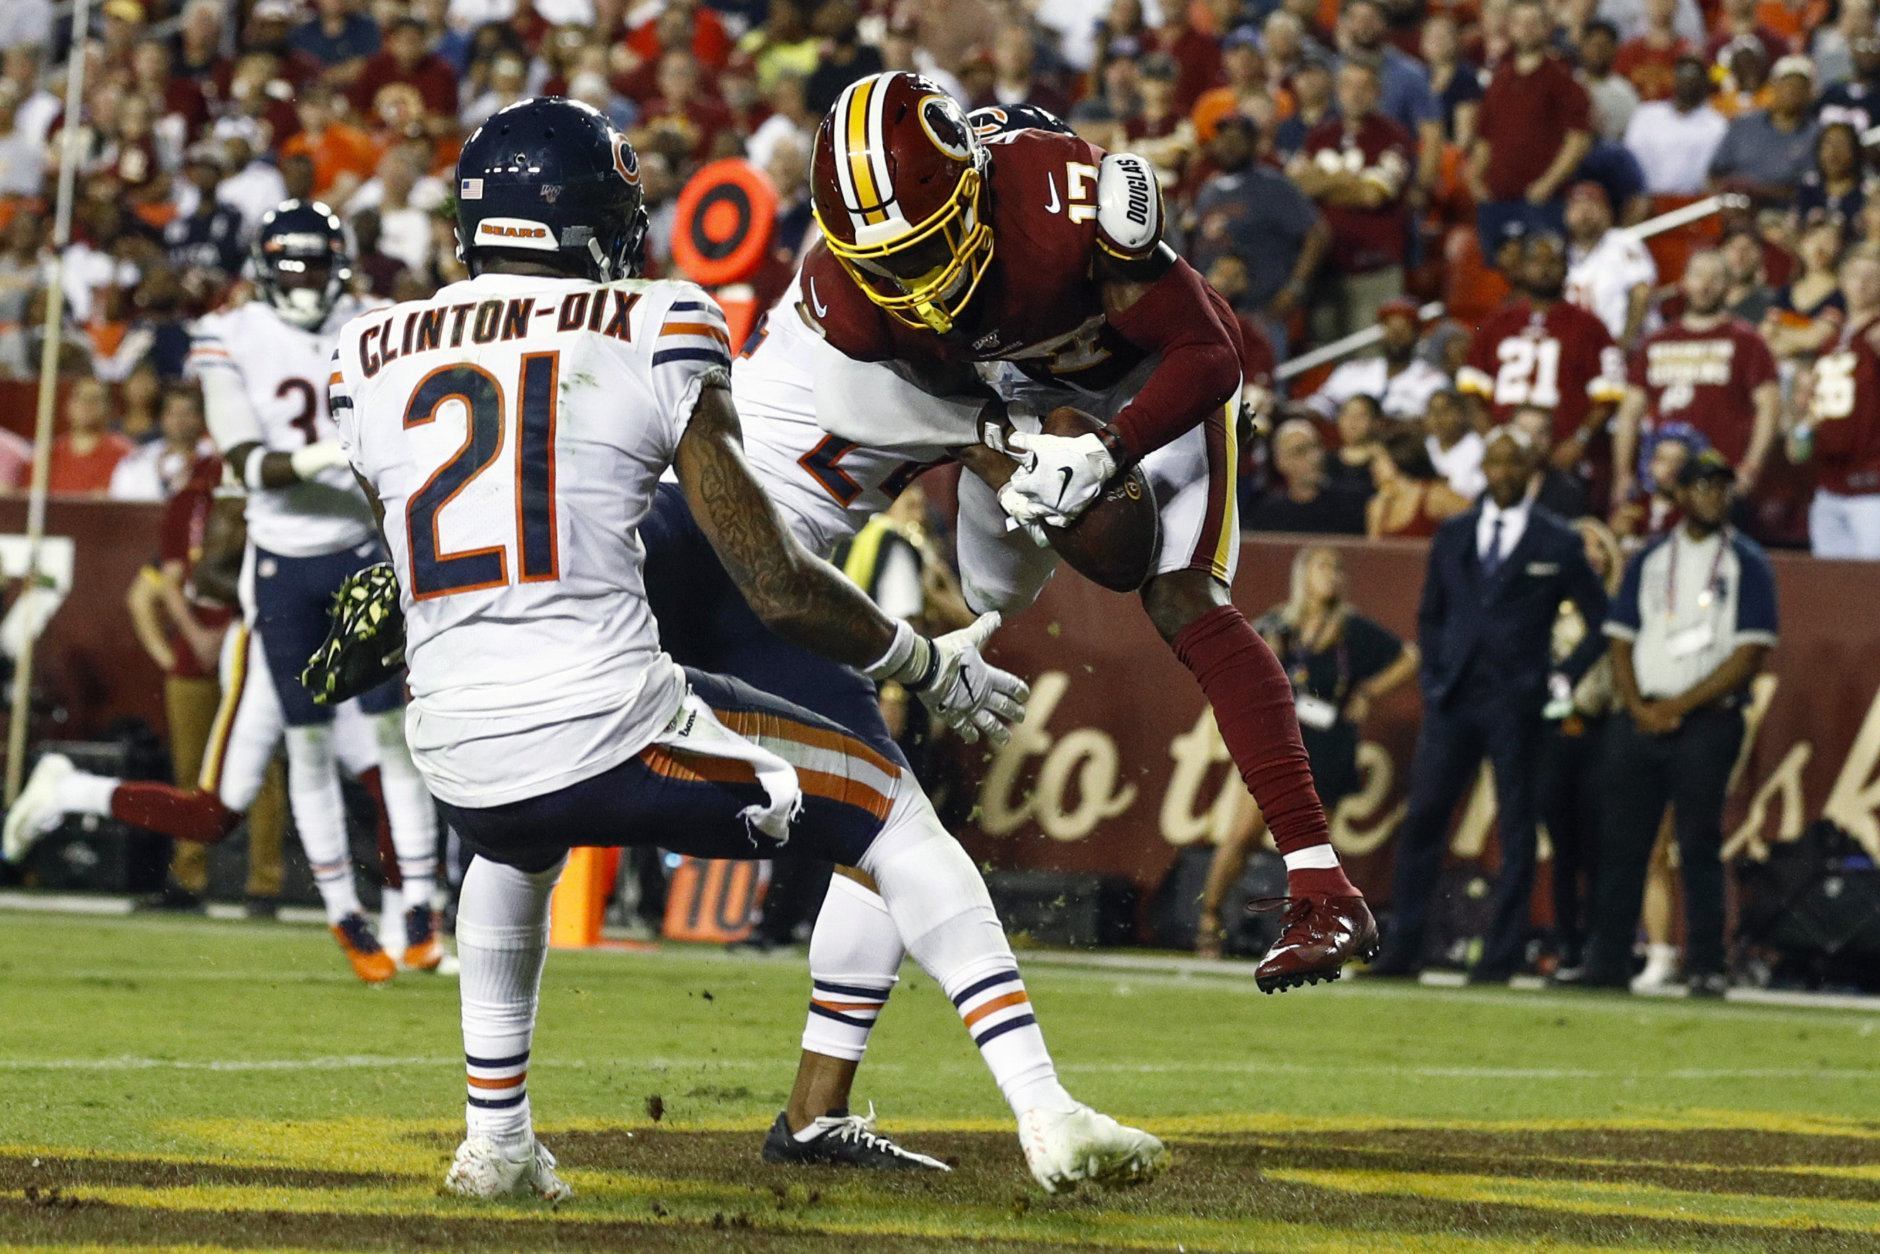 <p><em><strong>Bears 31</strong></em><br />
<em><strong>Redskins 15</strong></em></p>
<p>The one and only thing the &#8216;Skins can feel good about is Terry McLaurin, the first player in NFL history to notch at least five catches and a receiving touchdown in each of his first three games. With apologies to Gardner Minshew (and his mustache), Scary Terry&#8217;s the steal of the 2019 NFL Draft.</p>
<p>But HaHa got the last laugh. Clinton-Dix got a Pick 6 in his return to FedEx Field to help Chicago snap a 7-game losing streak against a Redskins team that has now lost eight straight on Monday Night Football and 24 of the 30 they&#8217;ve played on MNF since 1997. Oof.</p>
